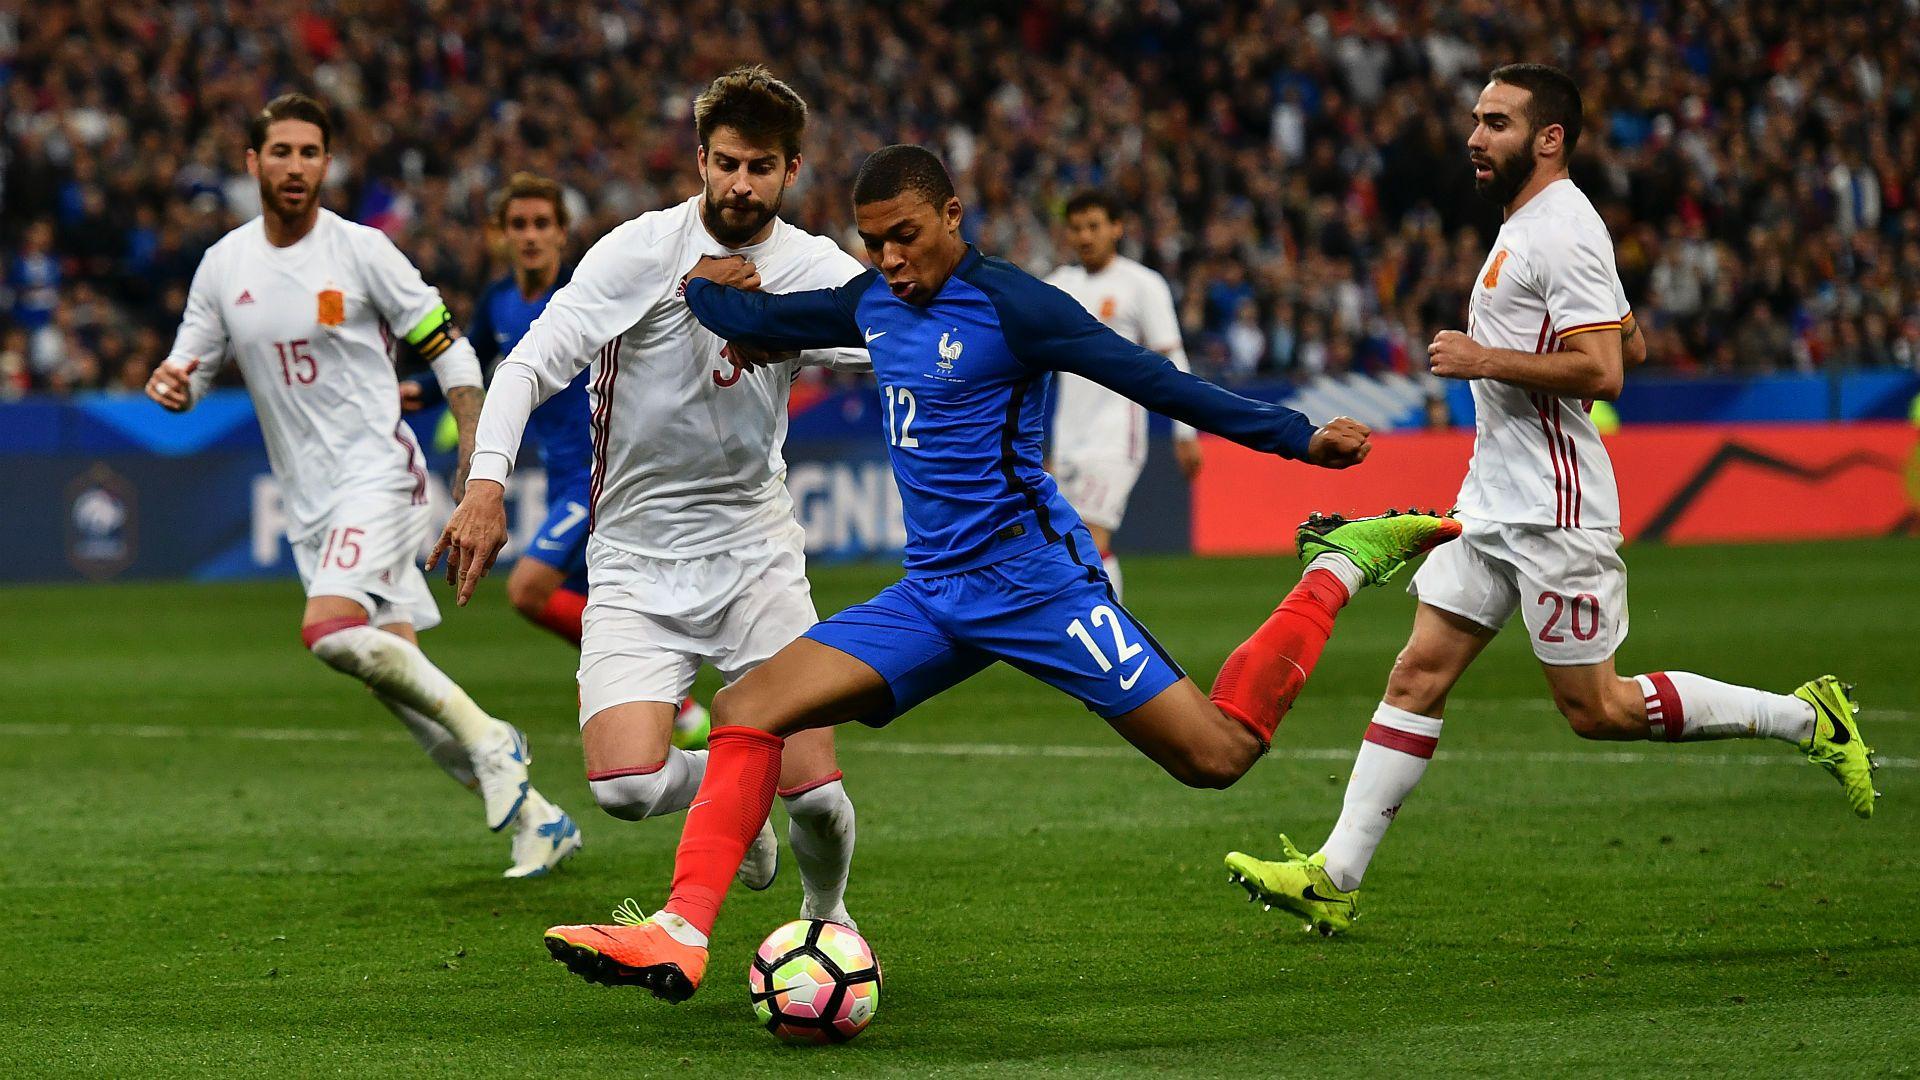 Mbappe To Be Included In France U20 Squad. INTERNATIONAL FRIENDLIES